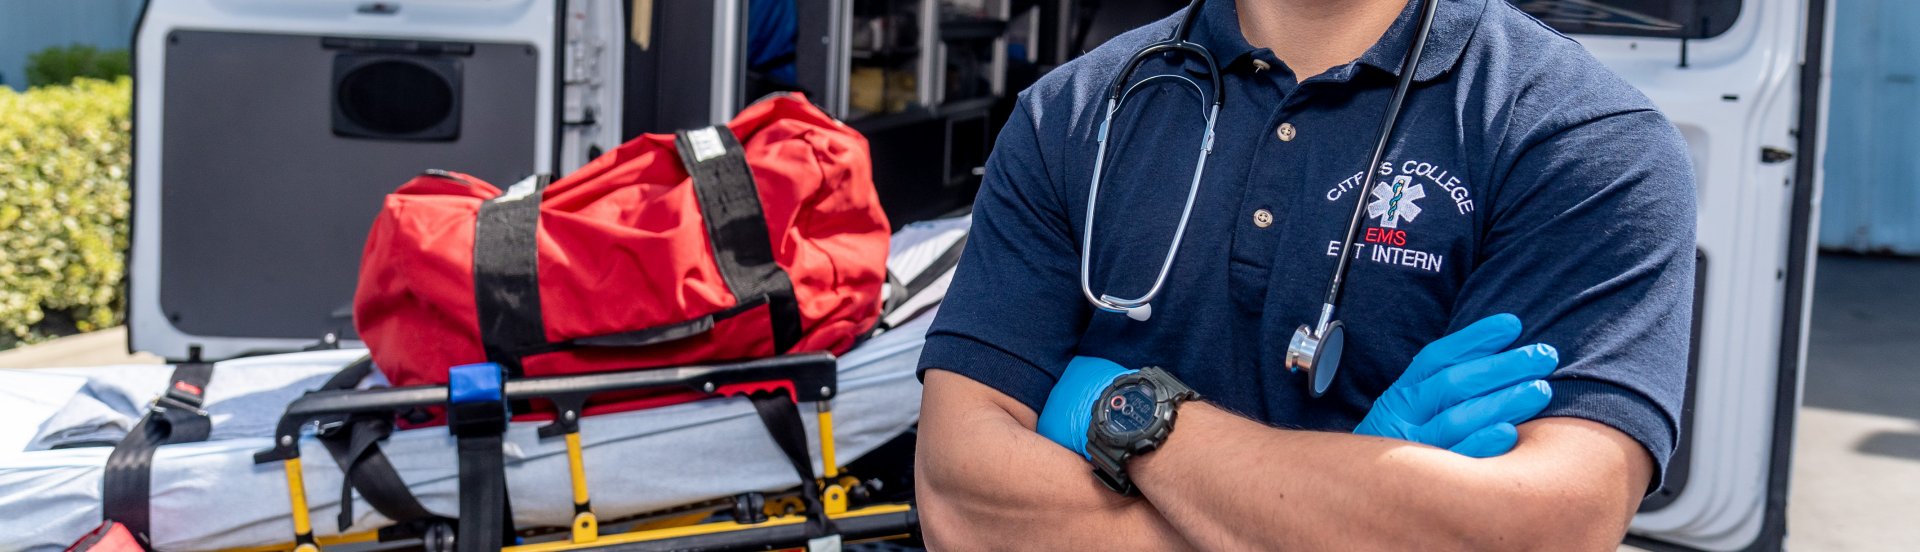 close-up of EMT student with medical equipment